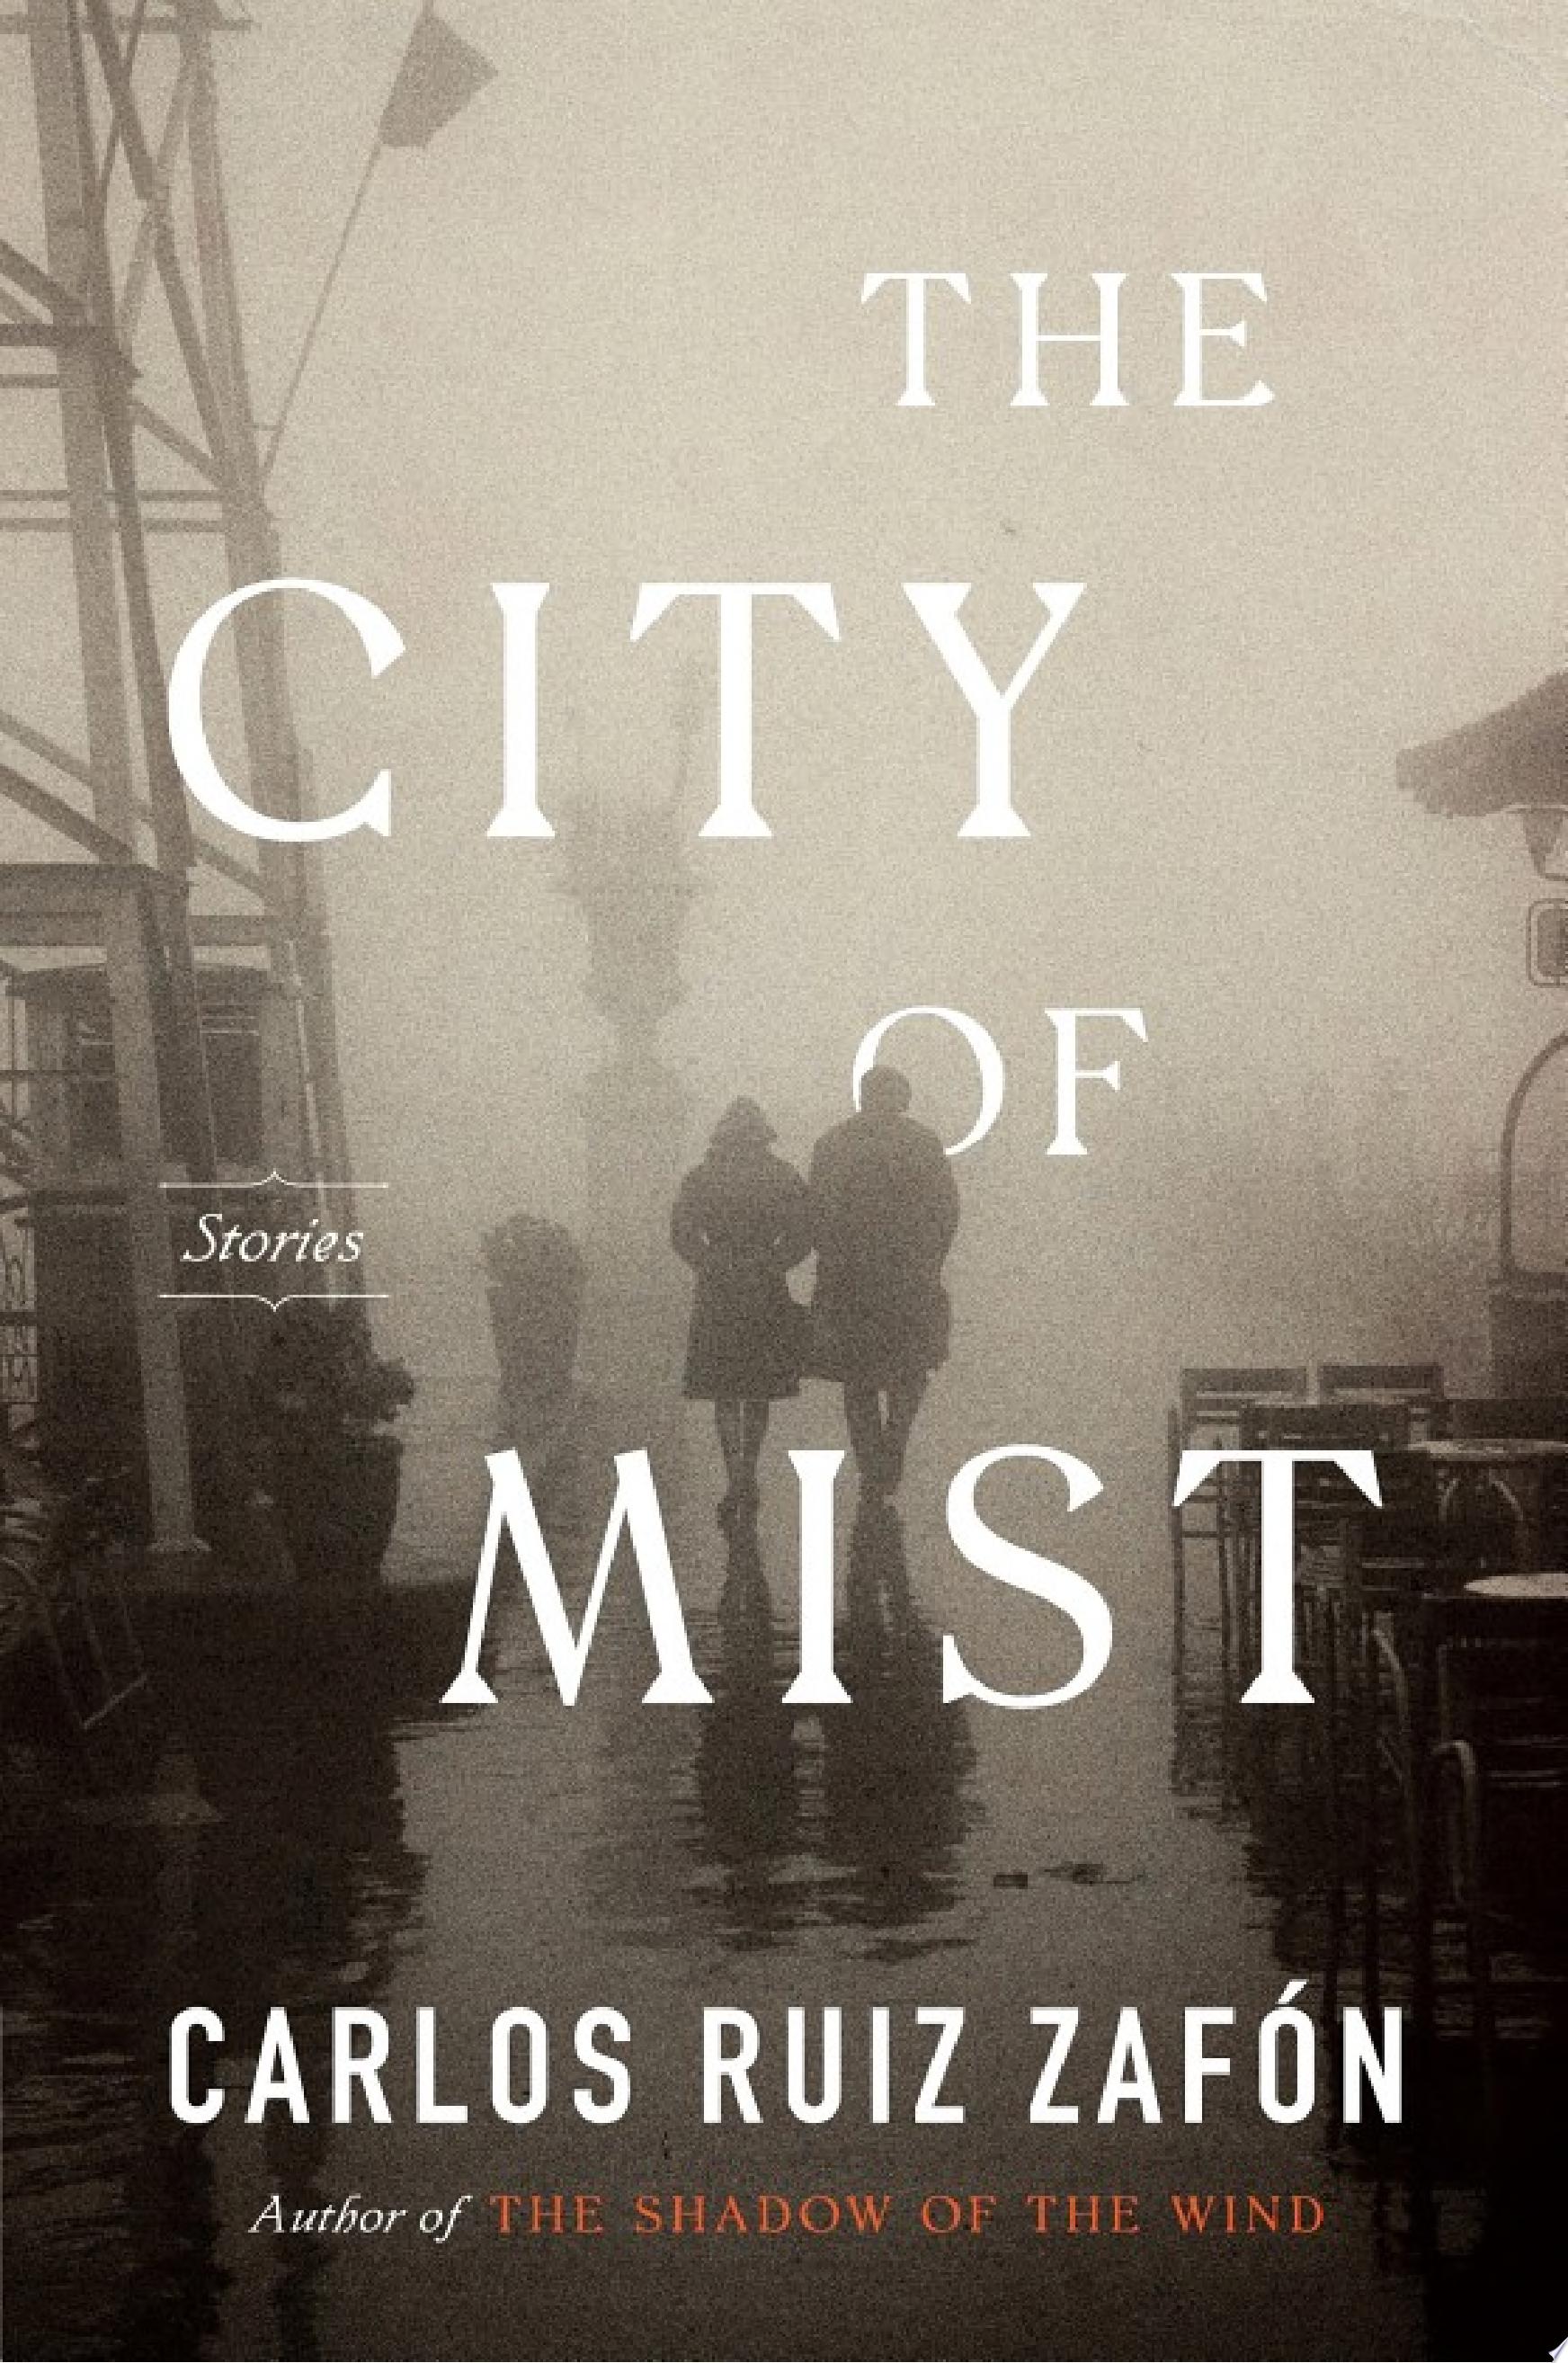 Image for "The City of Mist"